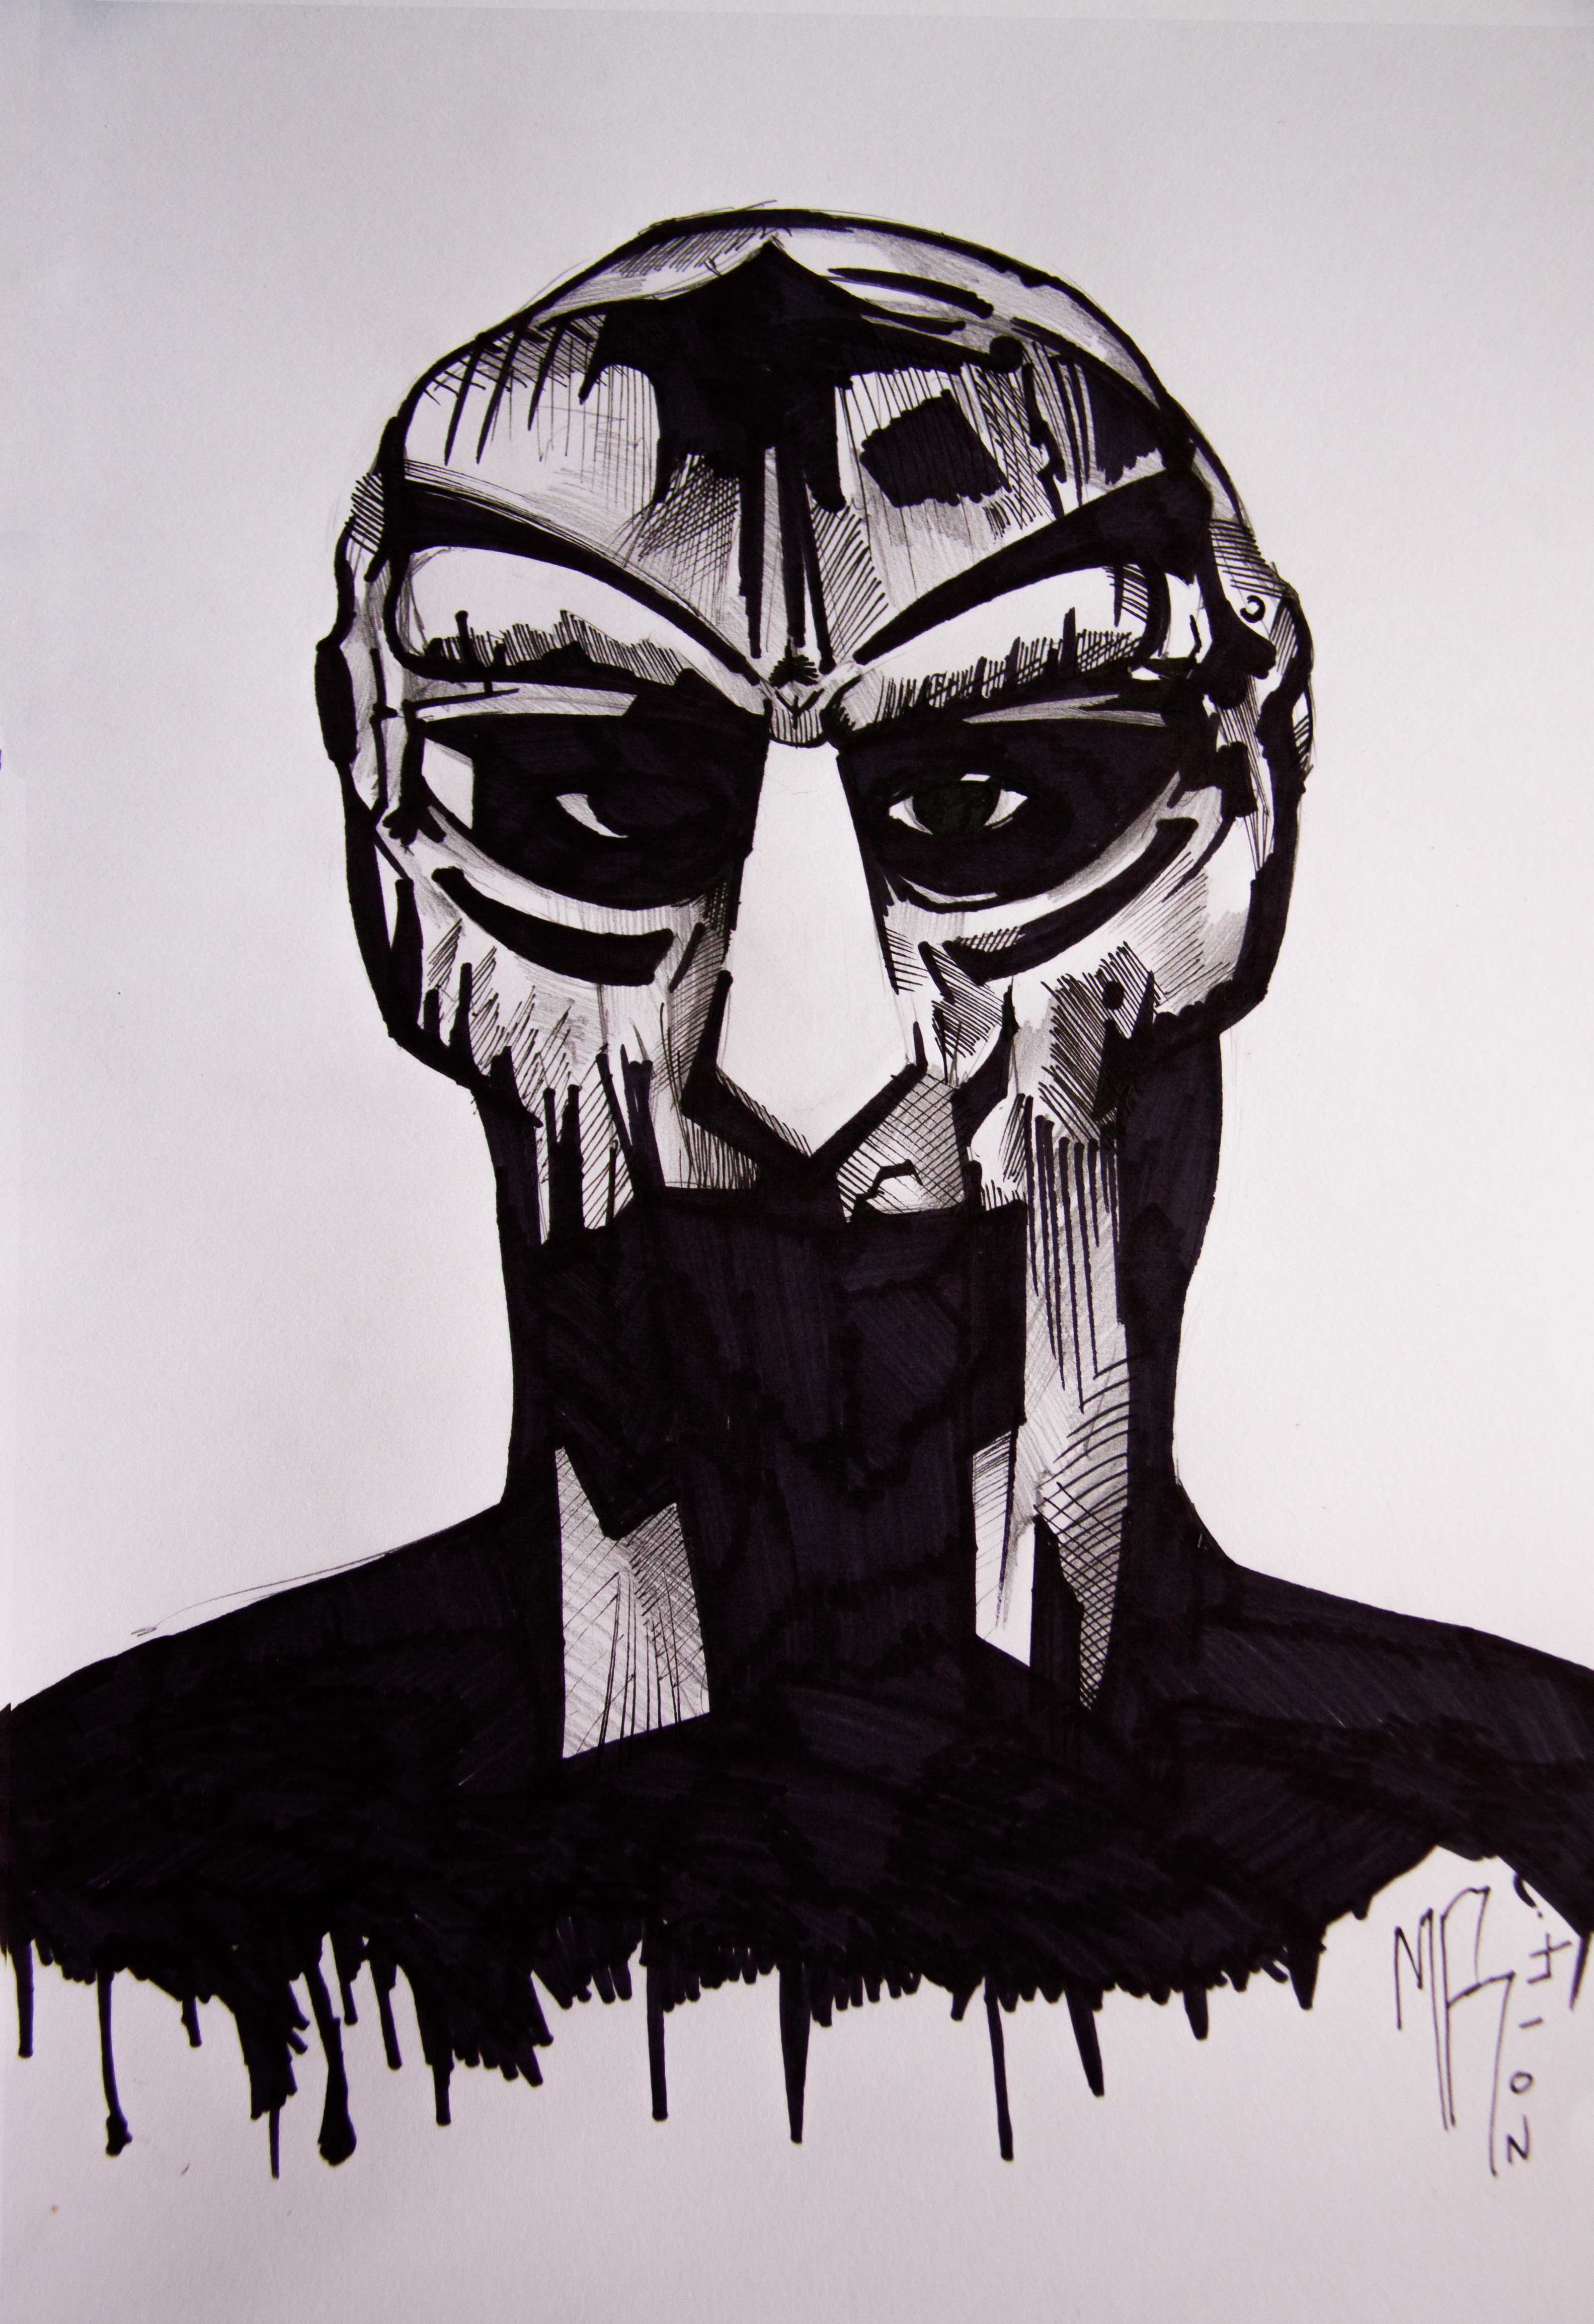 Spent a couple of hours drawing this picture of MF Doom